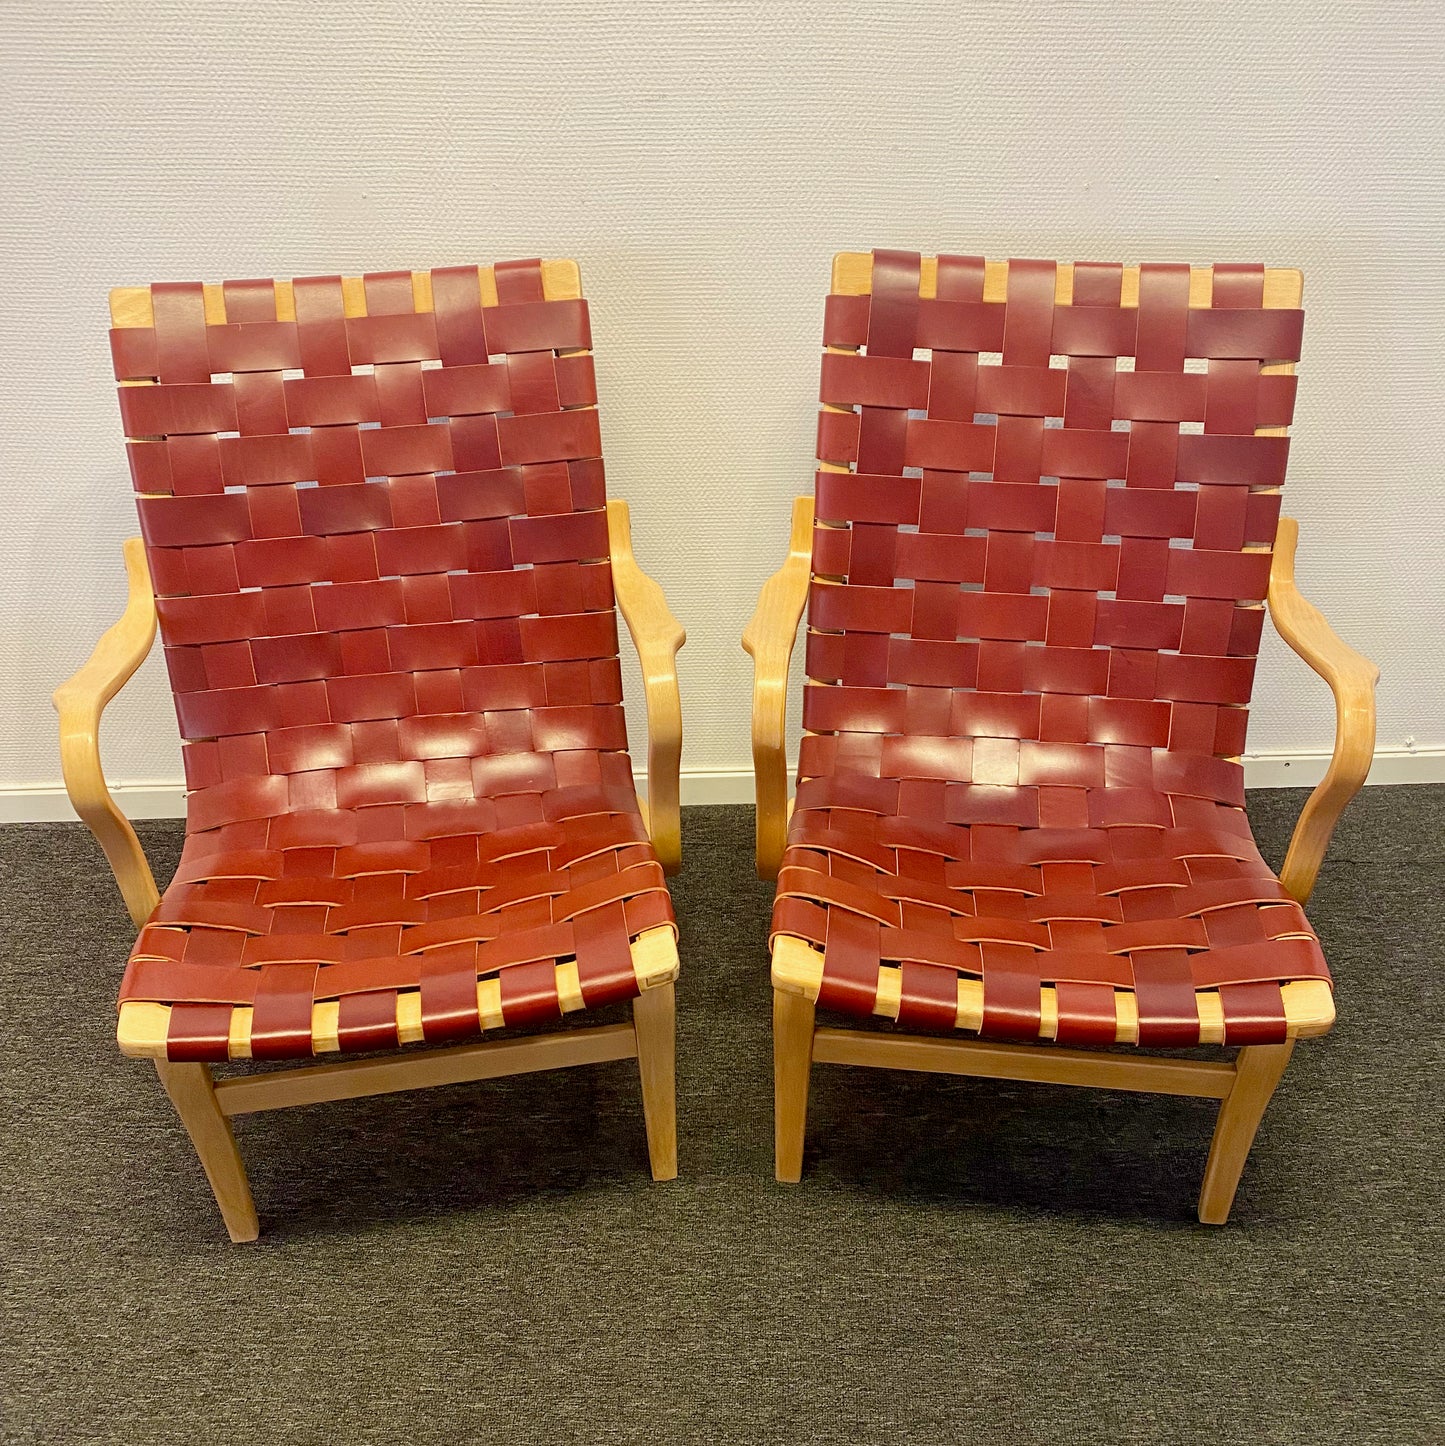 Bruno Mathsson - Set of 2 Eva-chairs with leather girths